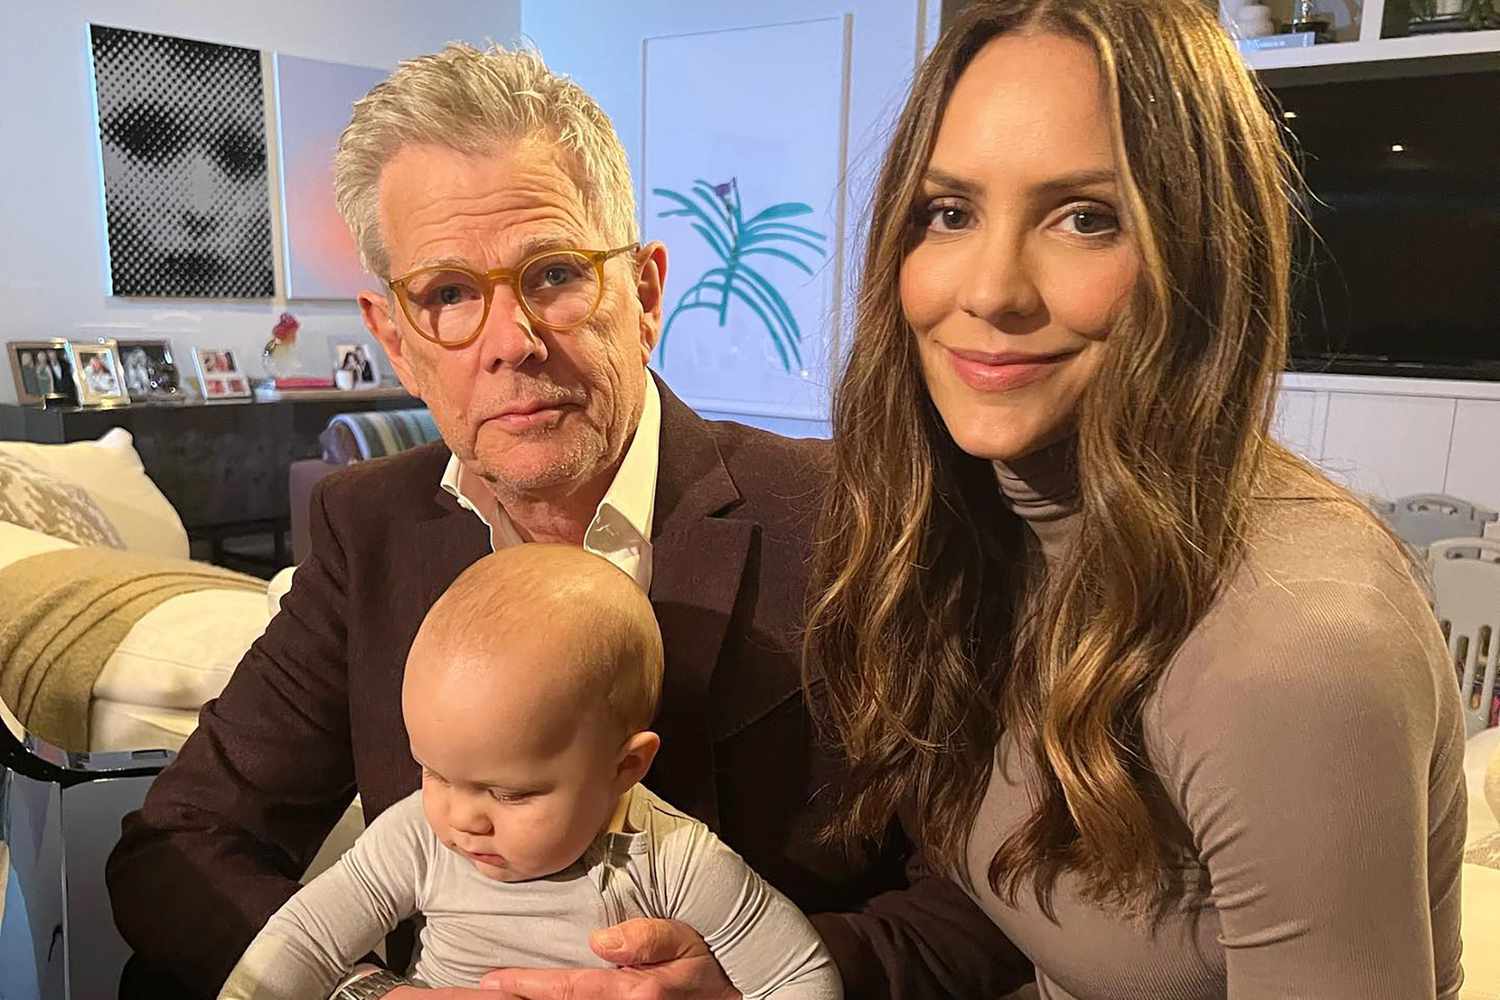 Katharine McPhee Shares First Photo of Son Rennie's Face in Father's Day Tribute to David Foster. https://www.instagram.com/p/Ce_rAgCp0-M/?hl=en. Katharine McPhee/instagram